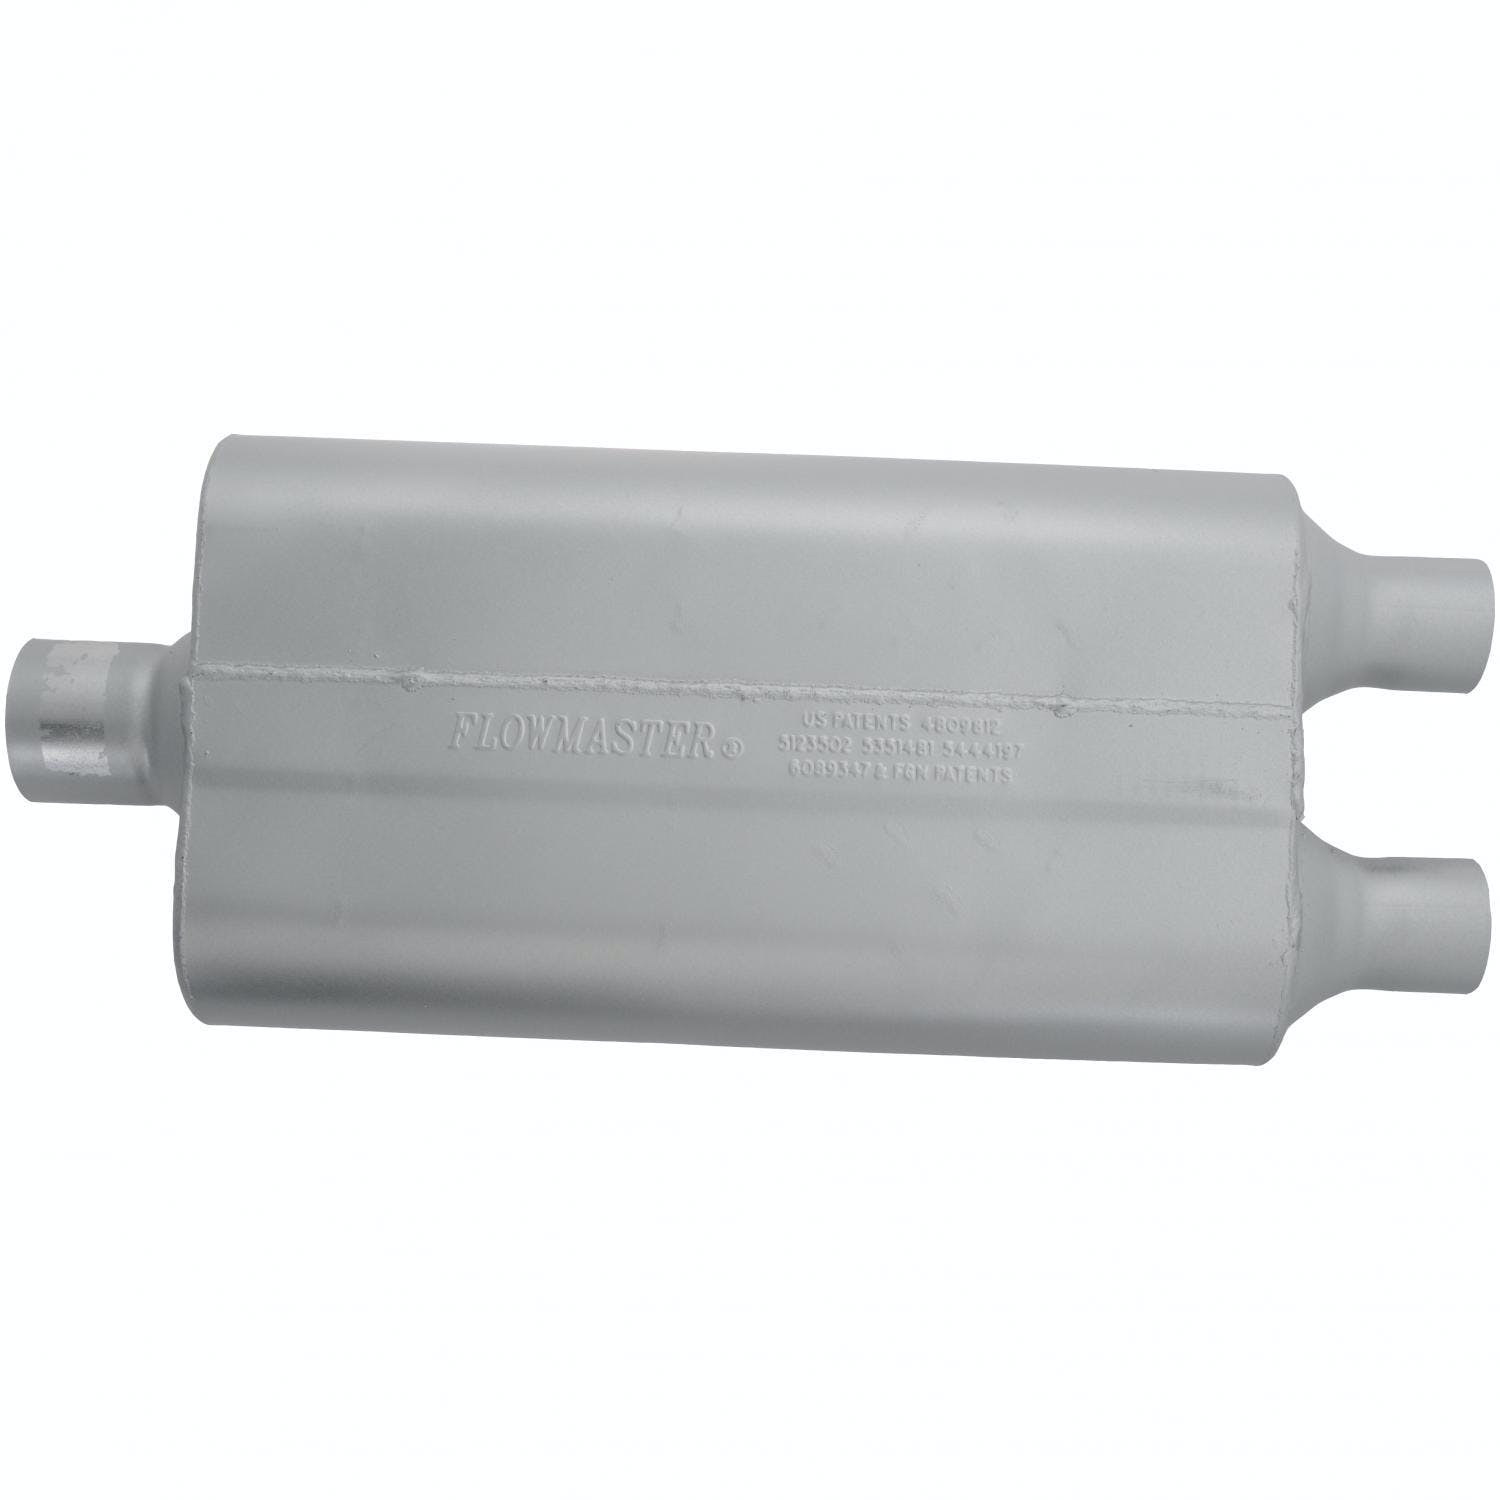 Flowmaster 9425502 2.5IN(C)/2OUT(D) 50 SERIES DF